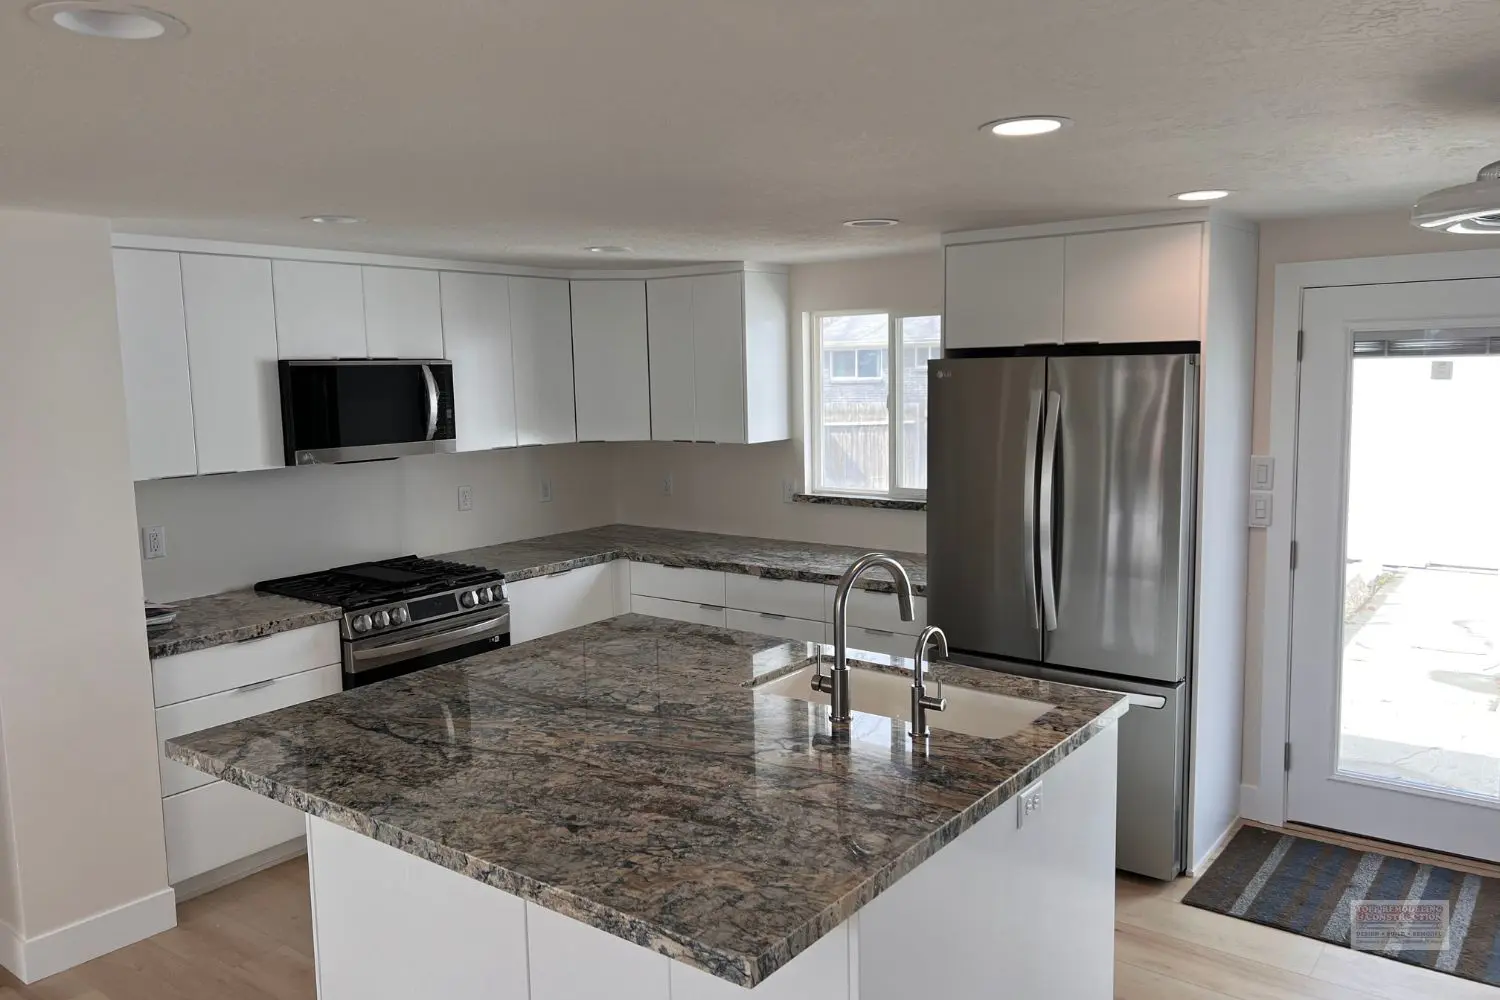 Price Kitchen Renovation by Topp Remodeling Construction A5